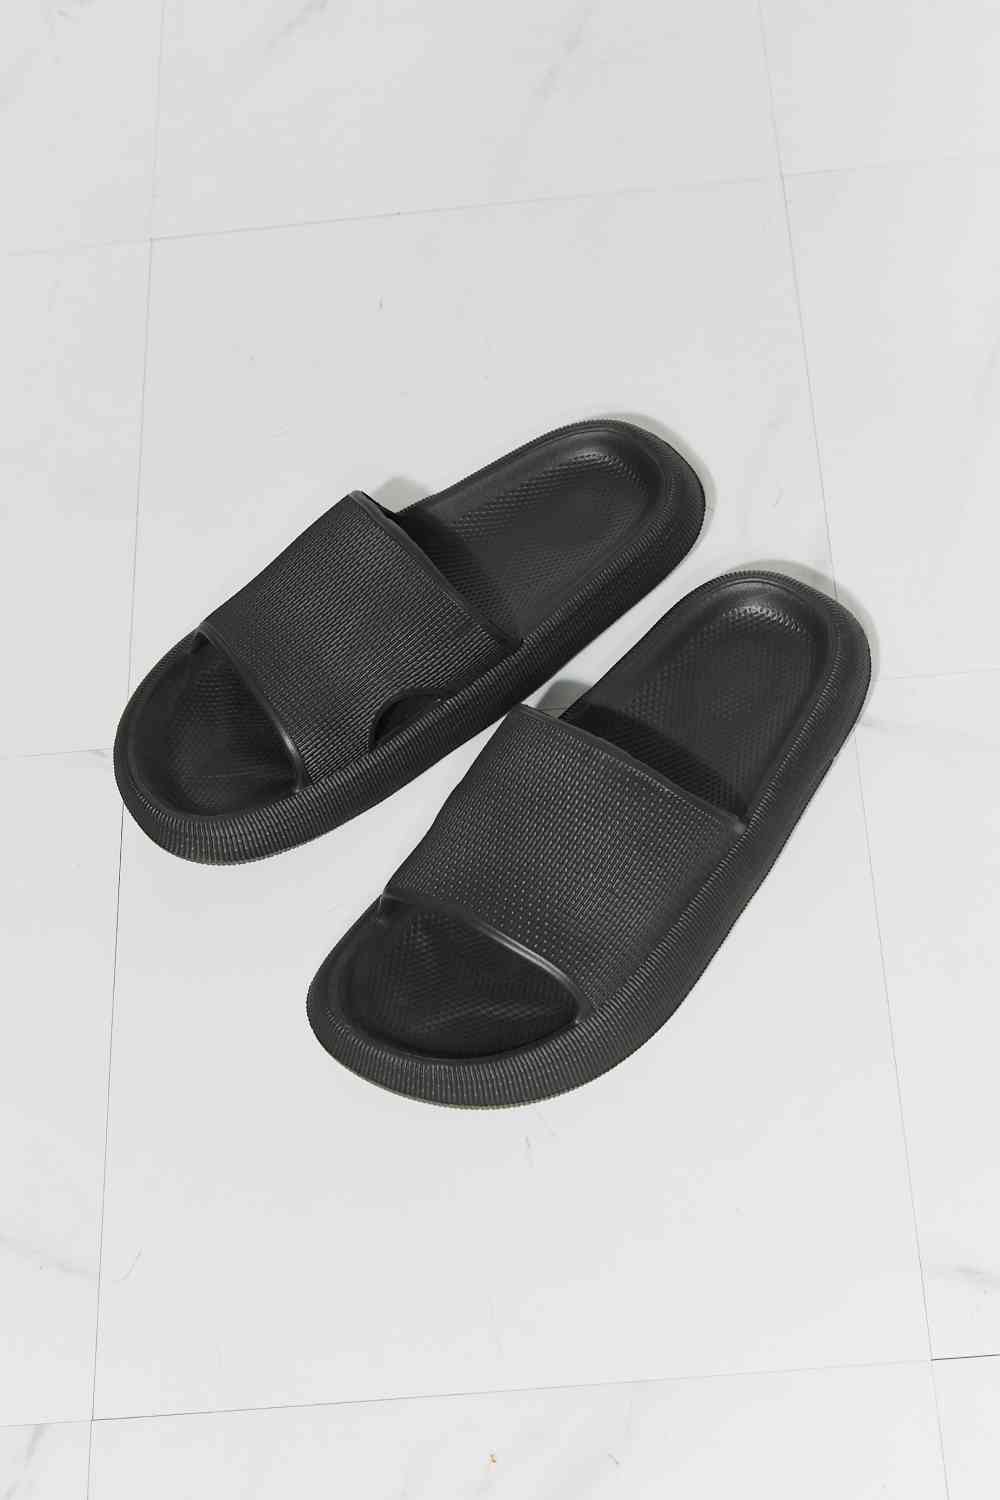 MMShoes Arms Around Me Open Toe Slide in Black - Opulence & Essence